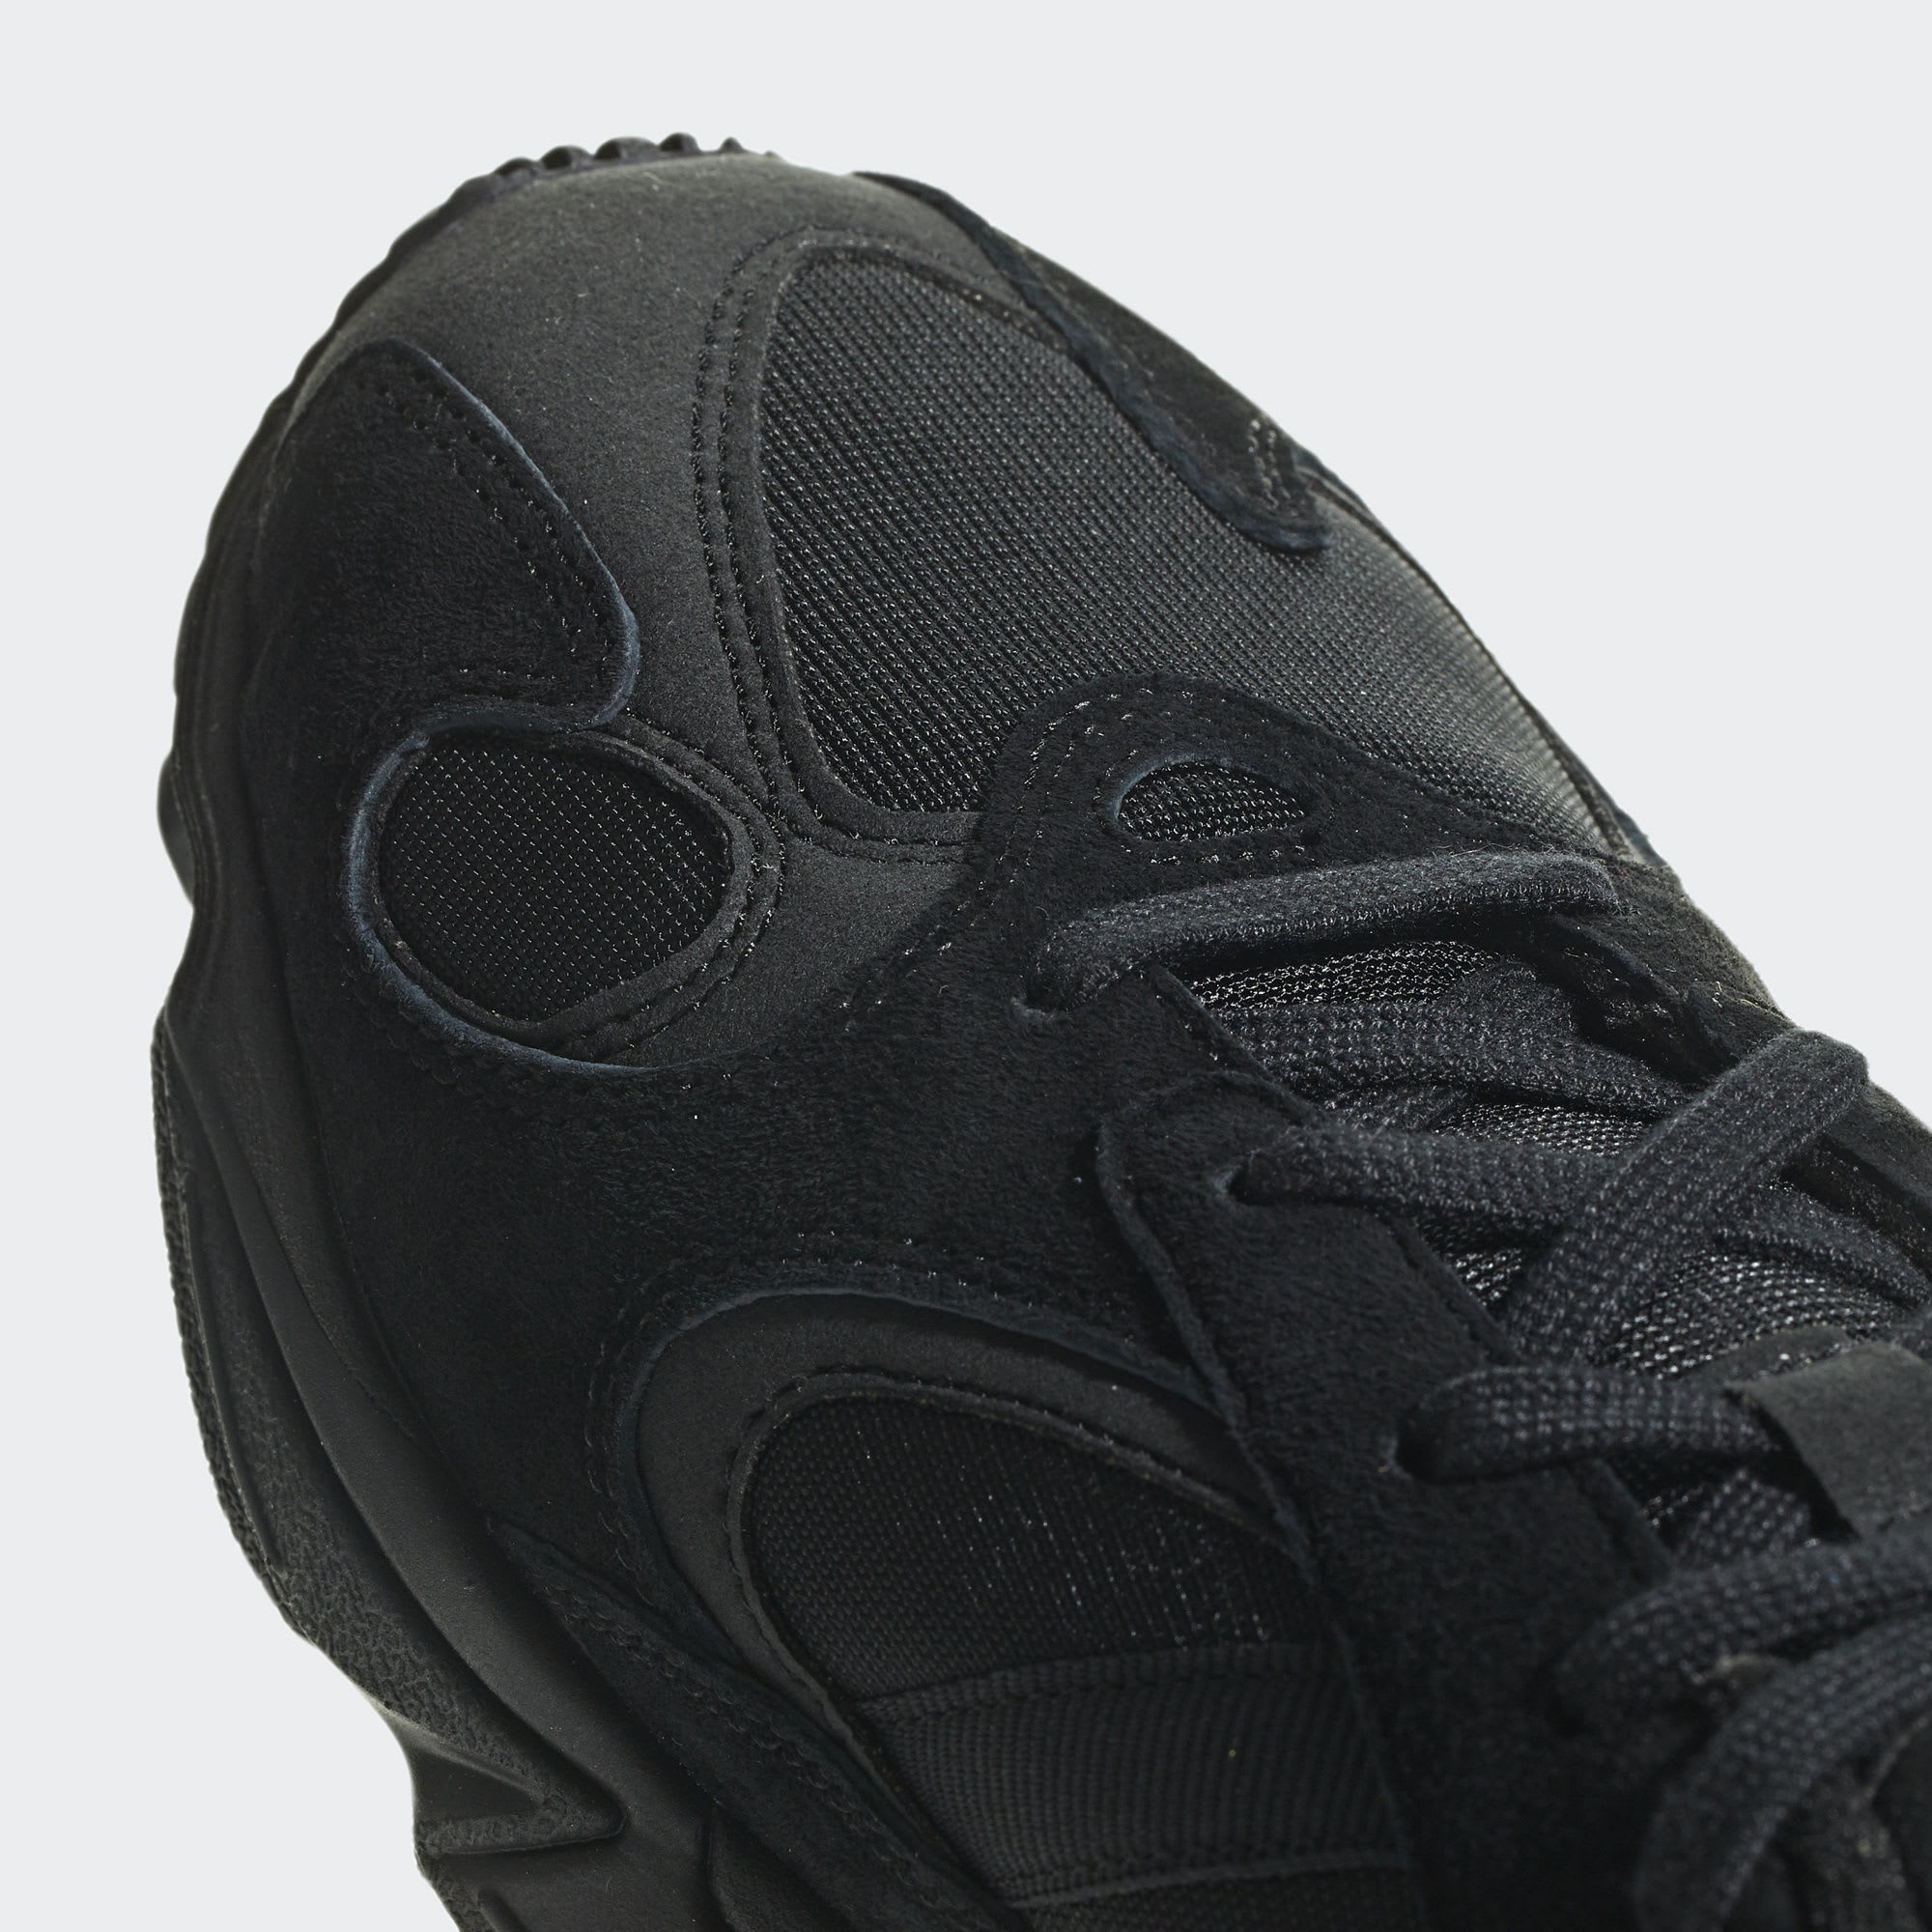 Adidas Yung-1 Triple Black Release Date G27026